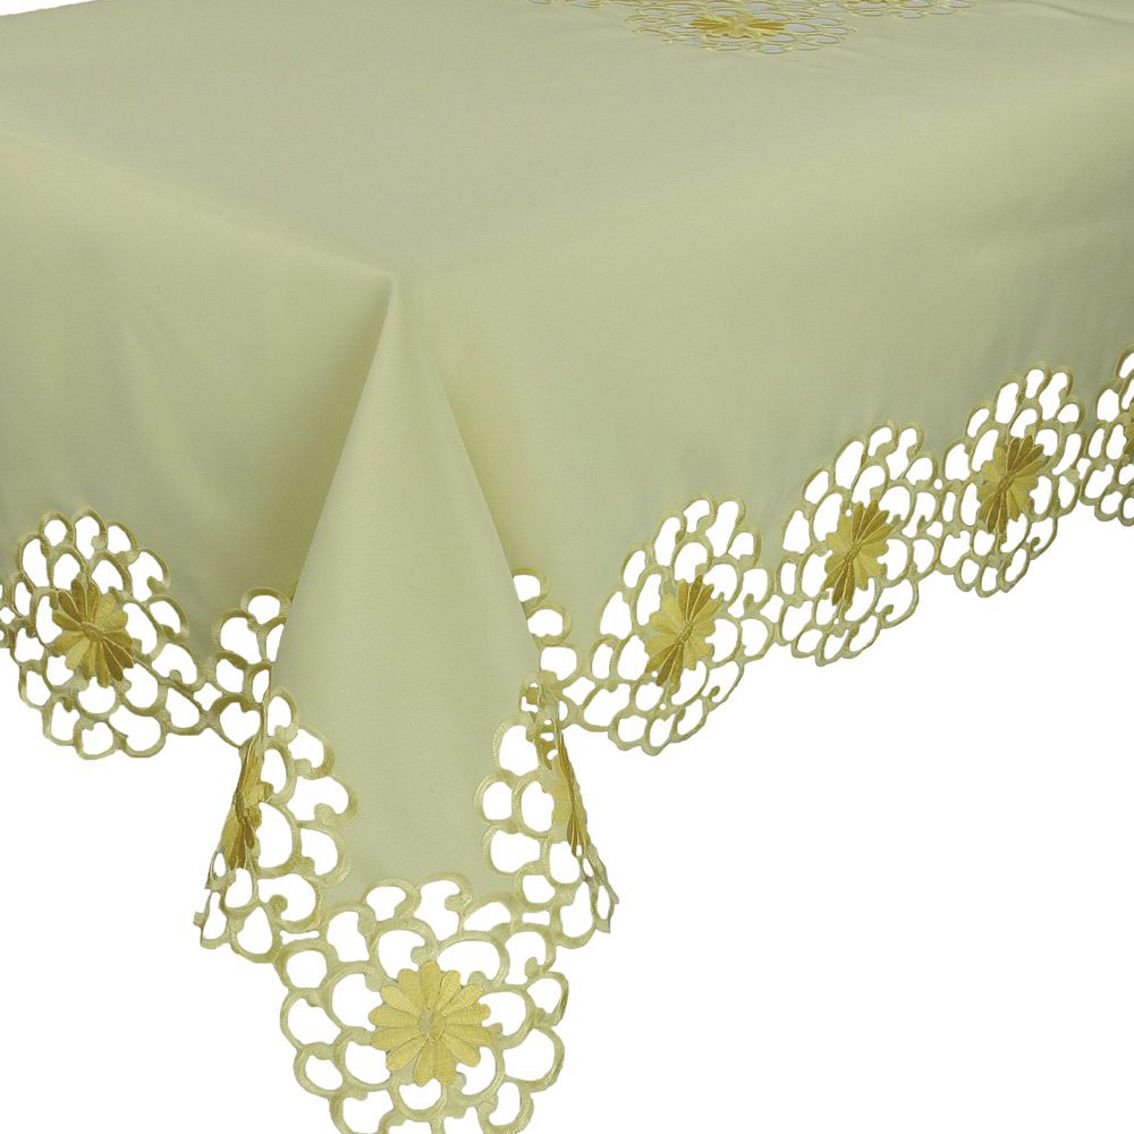 Xia Home Fashions,  Daisy Splendor Tablecloth, 70-Inch By 108-Inch, Yellow - Image 2 of 2